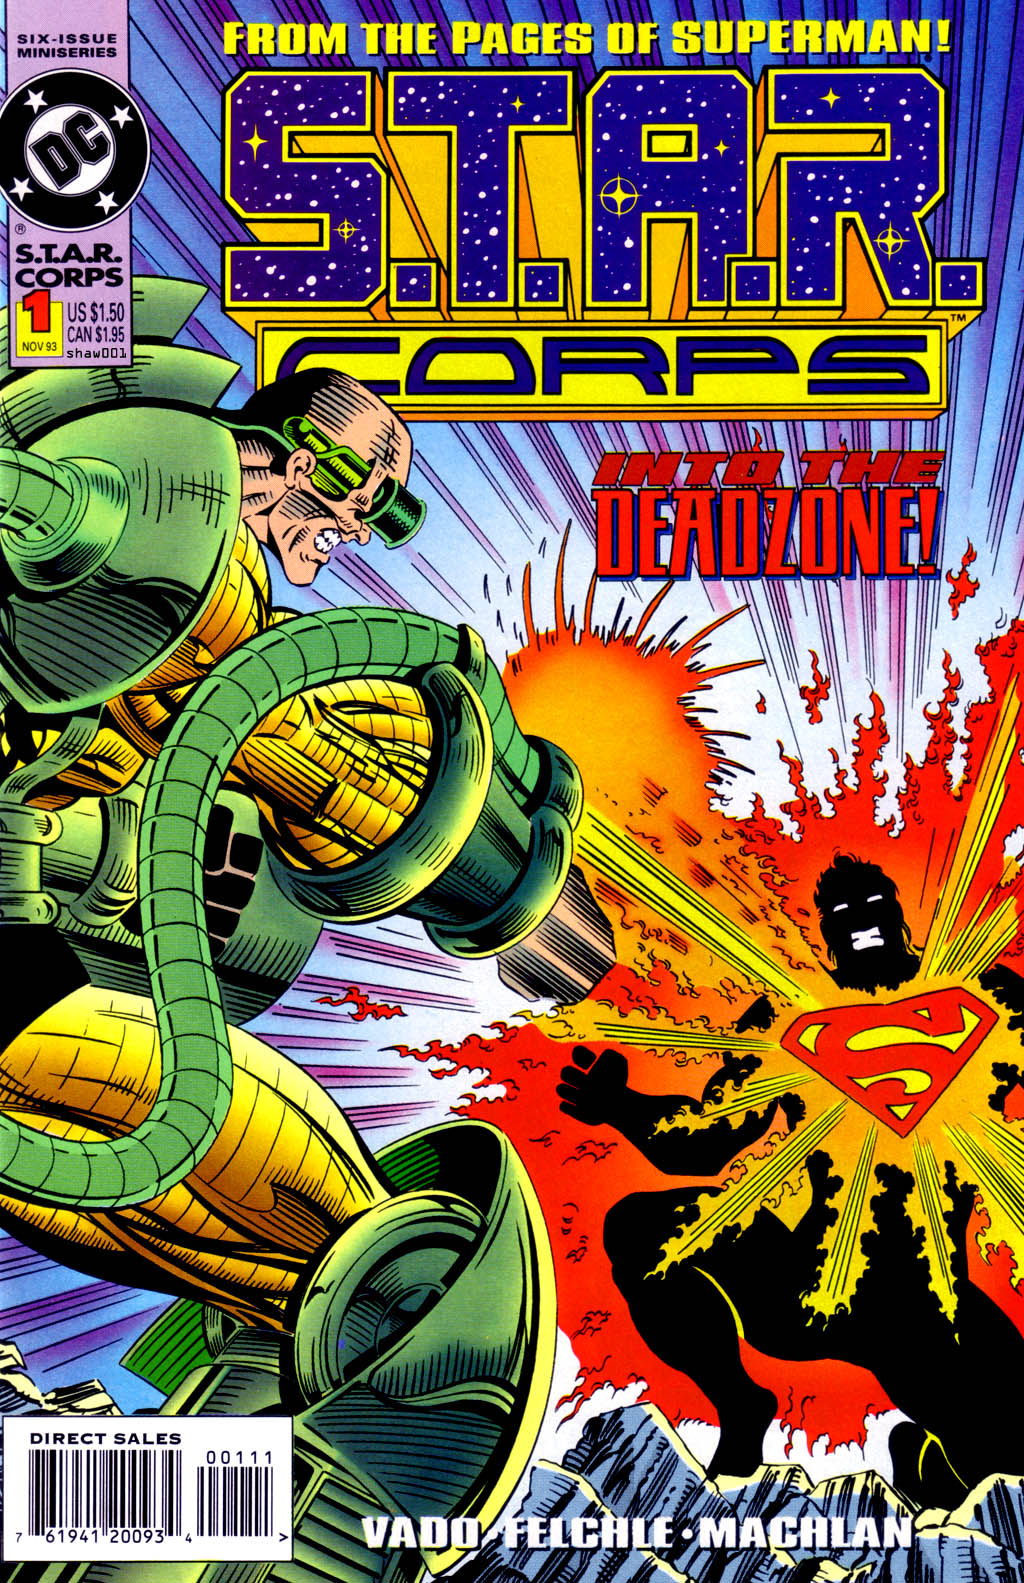 Read online S.T.A.R. Corps comic -  Issue #1 - 1